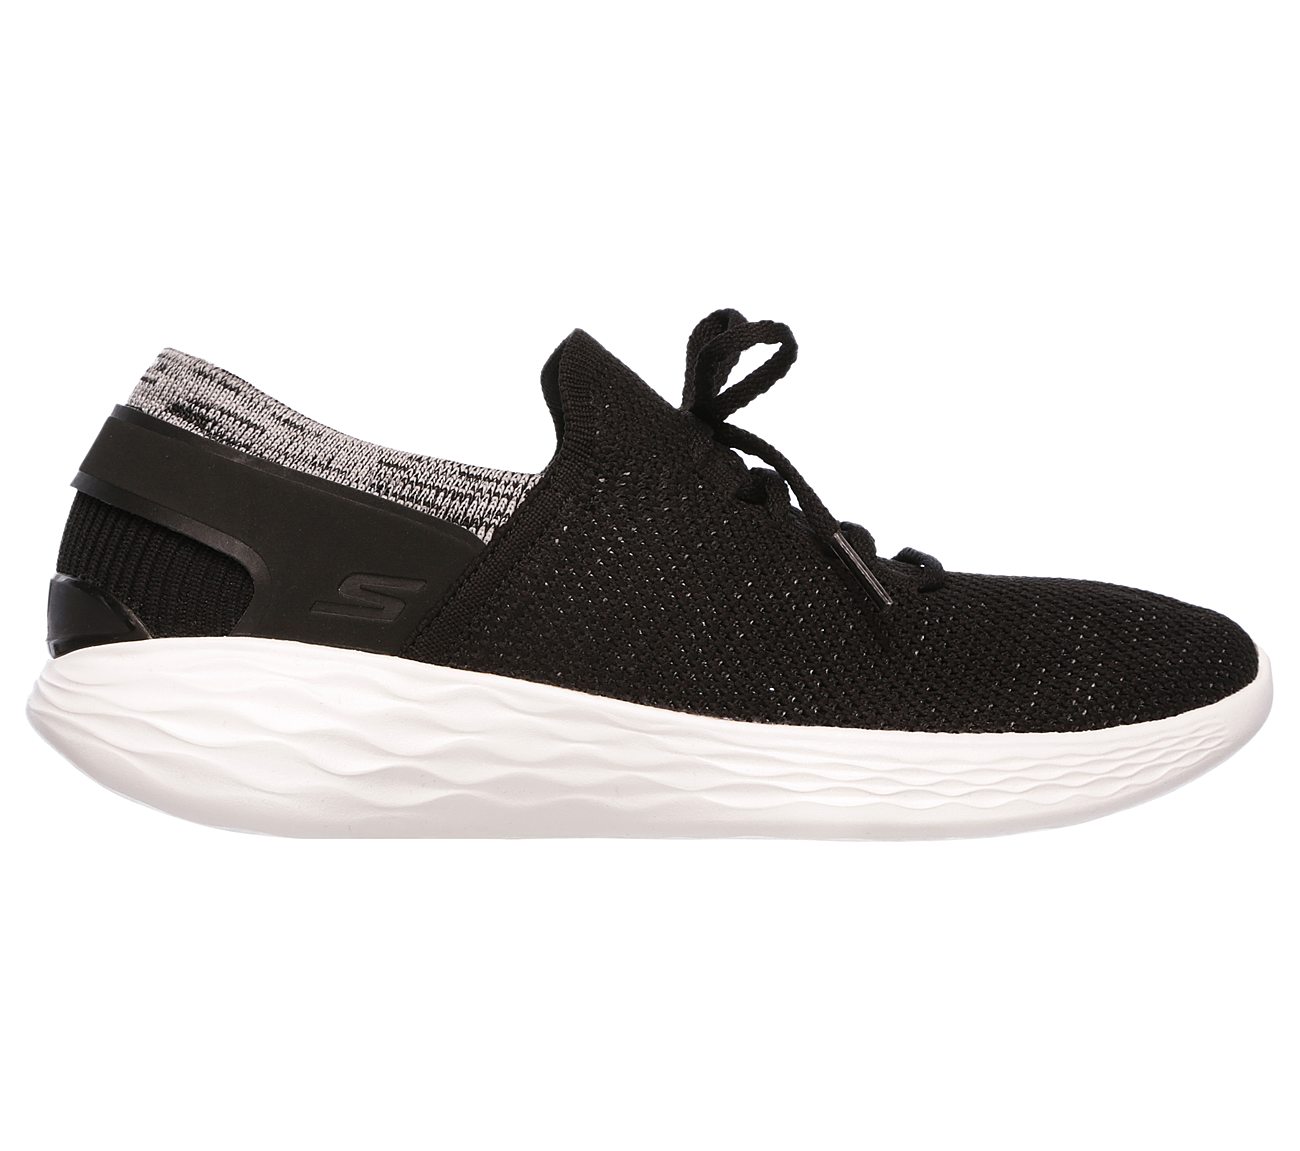 Buy SKECHERS YOU - Spirit YOU by skechers Shoes only $70.00